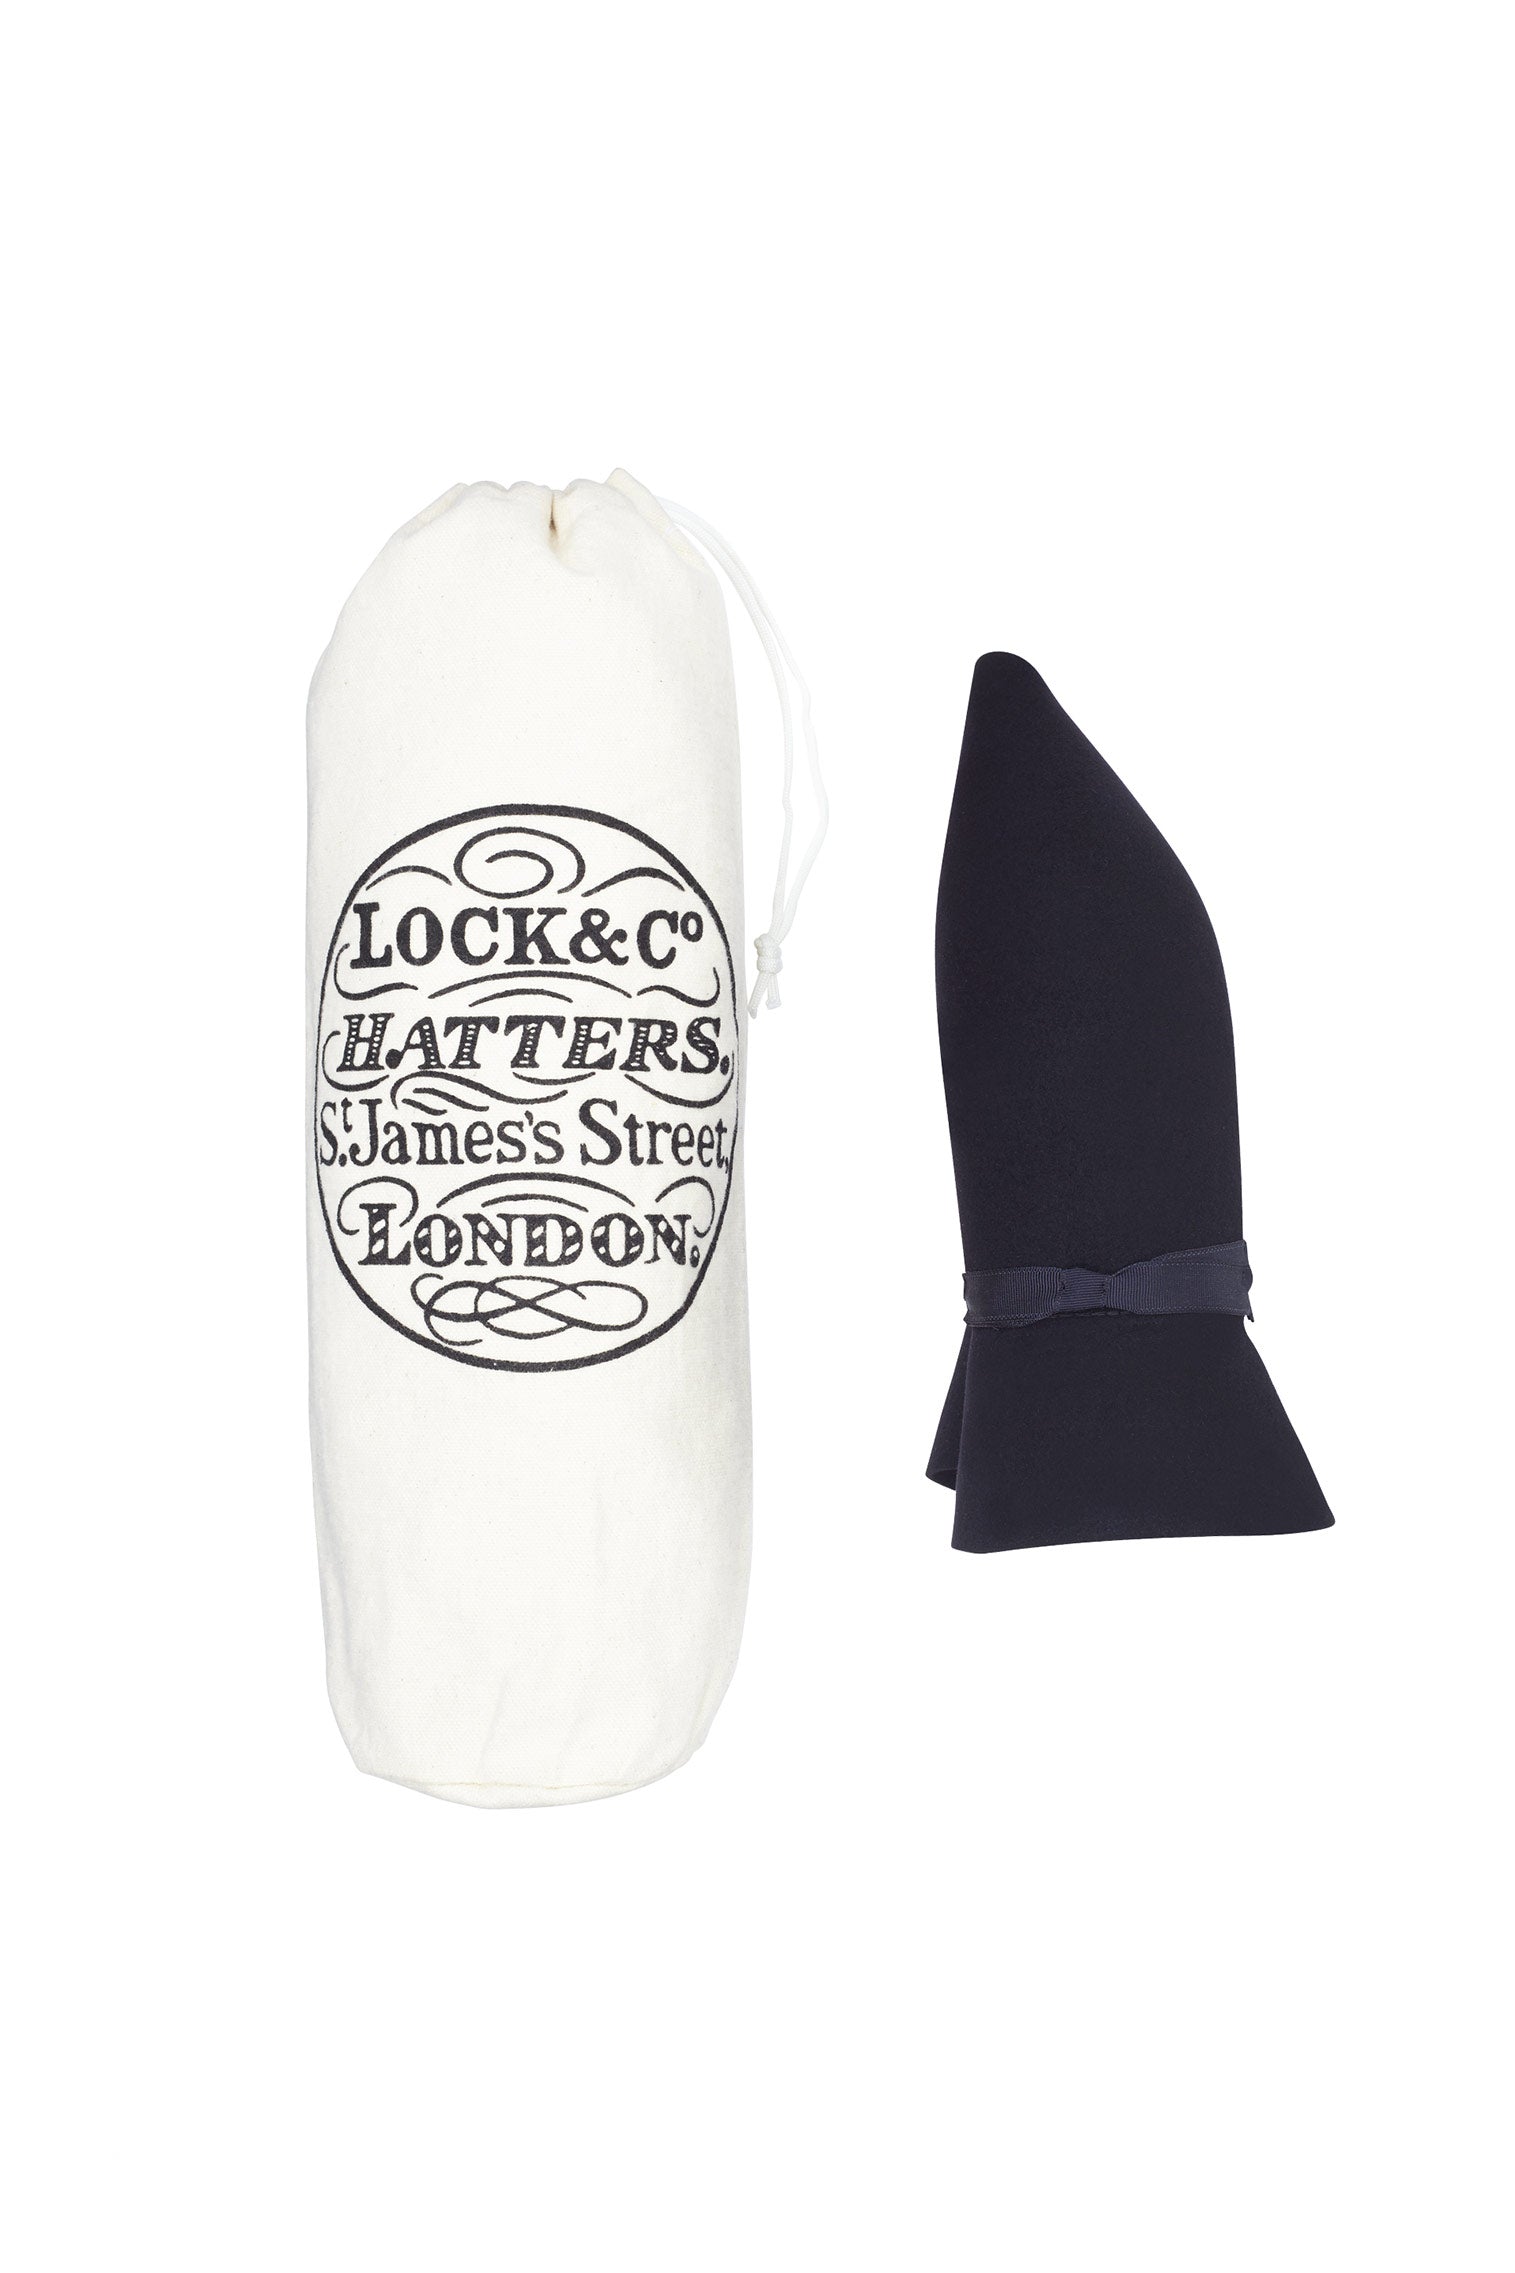 Canvas Tube - Products - Lock & Co. Hatters London UK